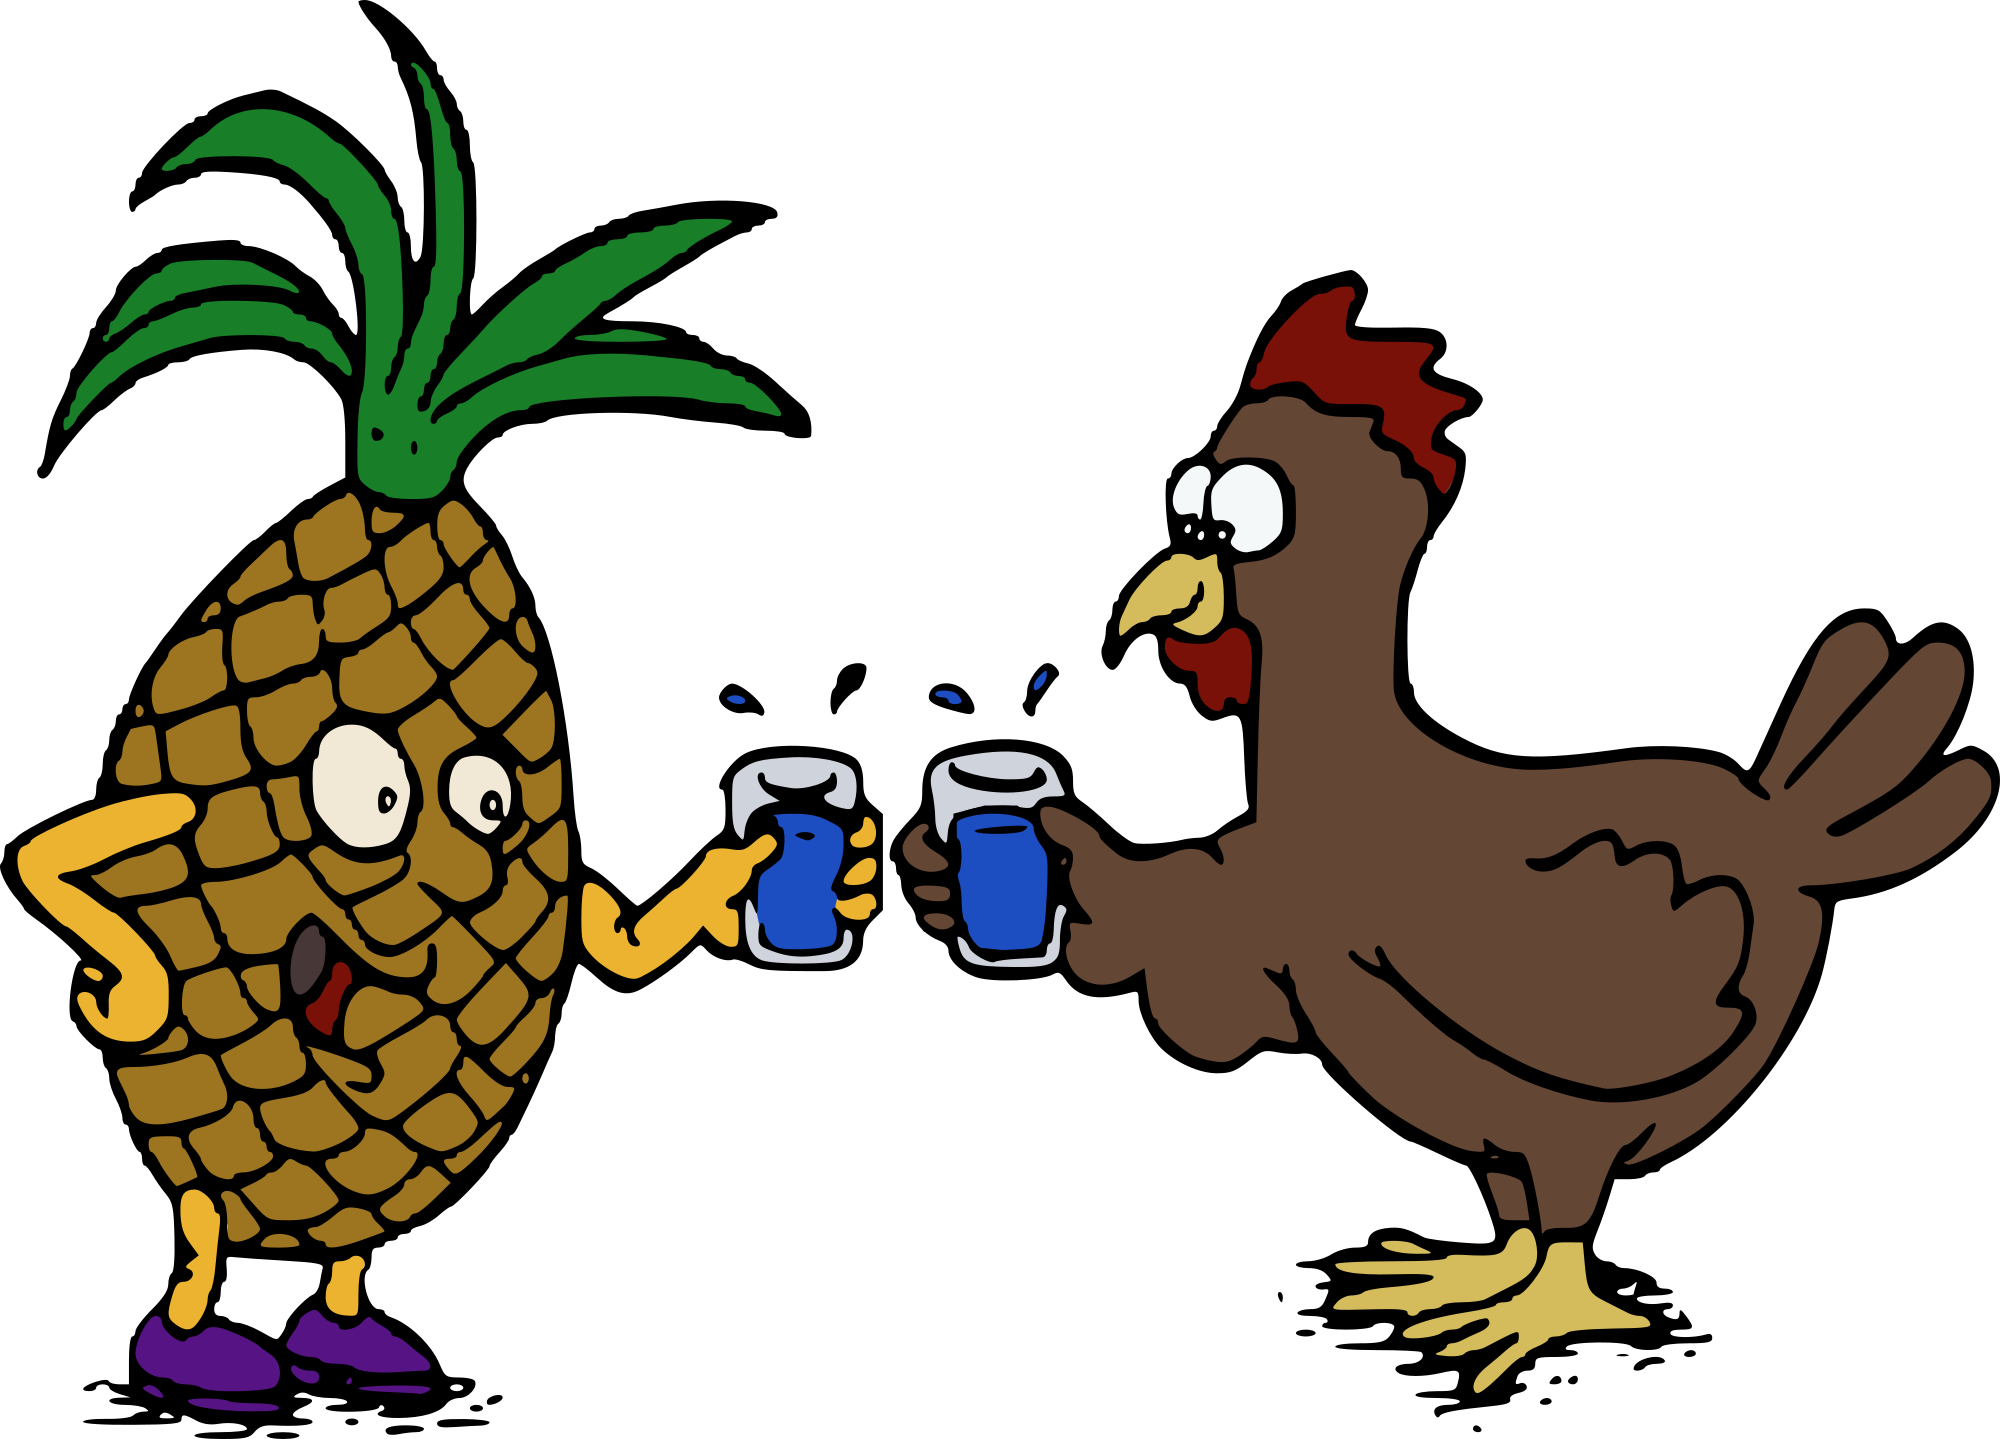 Free pineapple and chicken clipart clipart and vector image